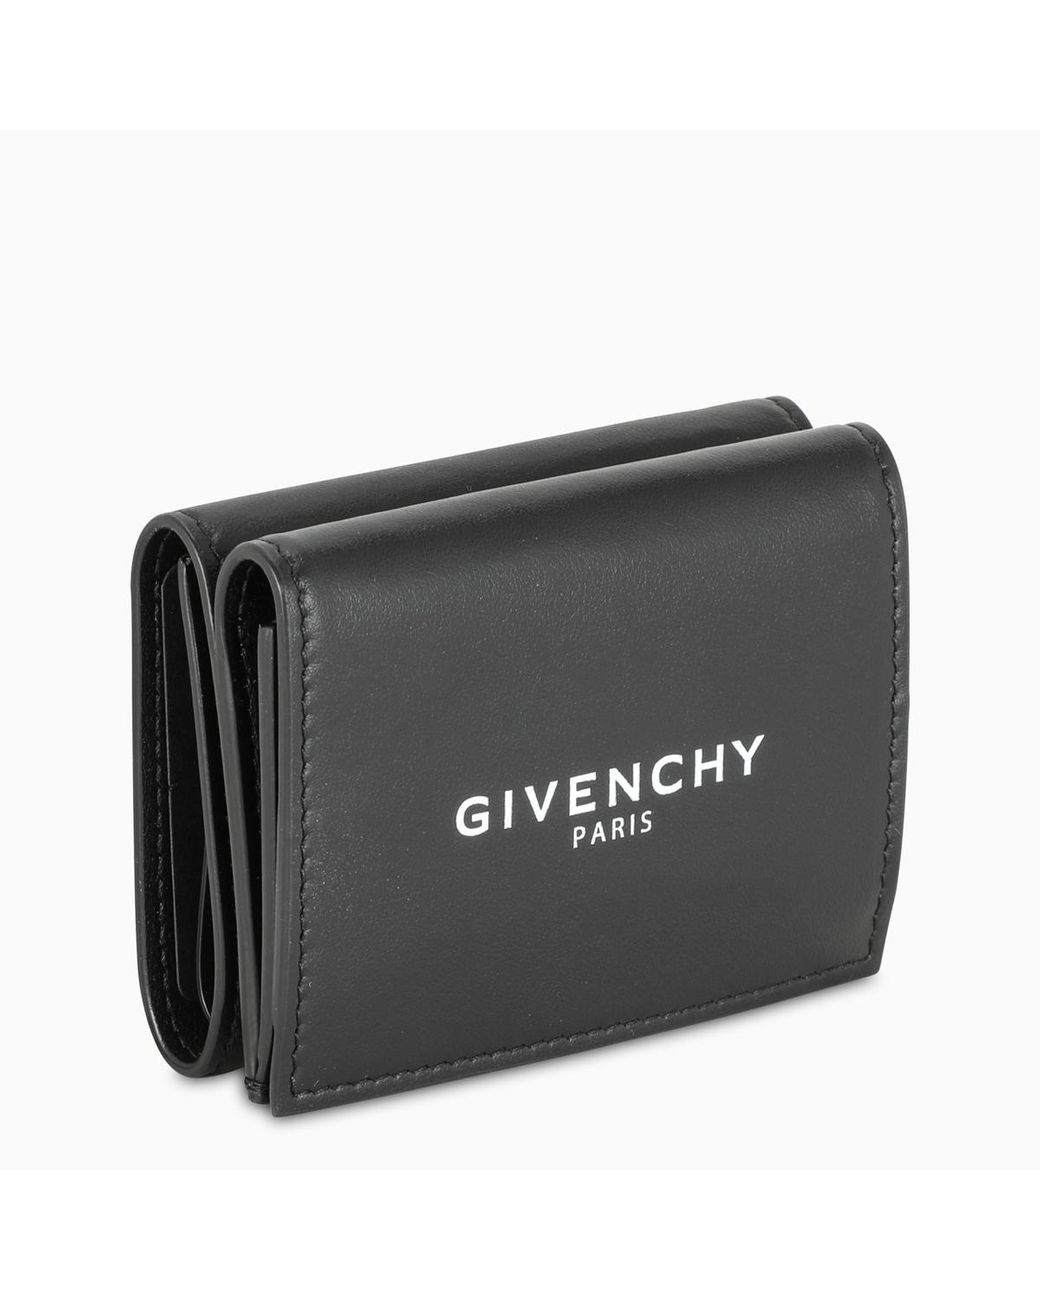 Givenchy Black Leather Compact Wallet for Men - Lyst